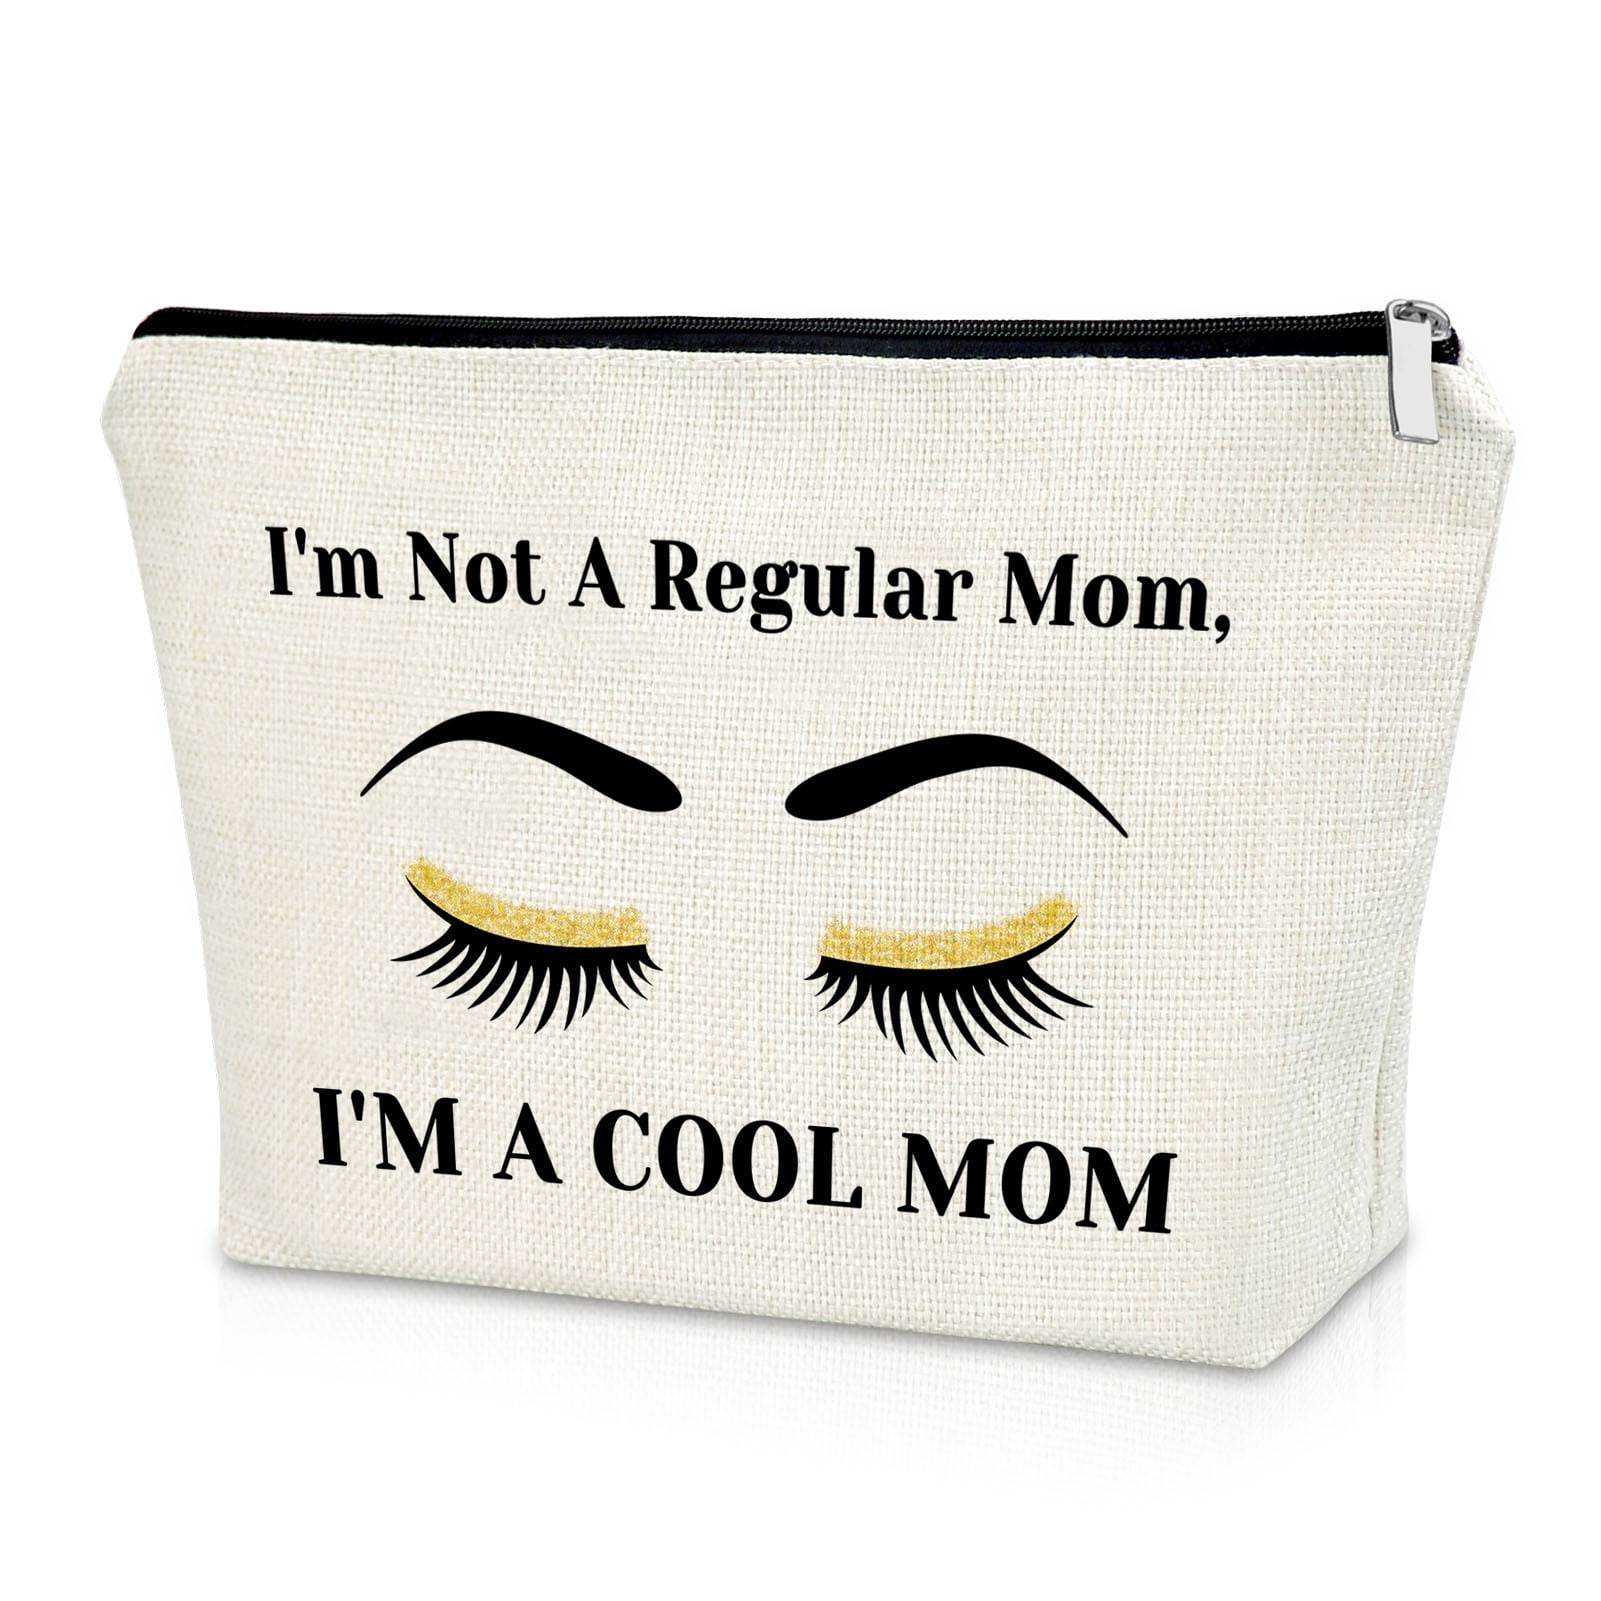 Details about   Luck This S-hit-Fun Mother‘s day Gifts Makeup Travel Case Makeup Bag 